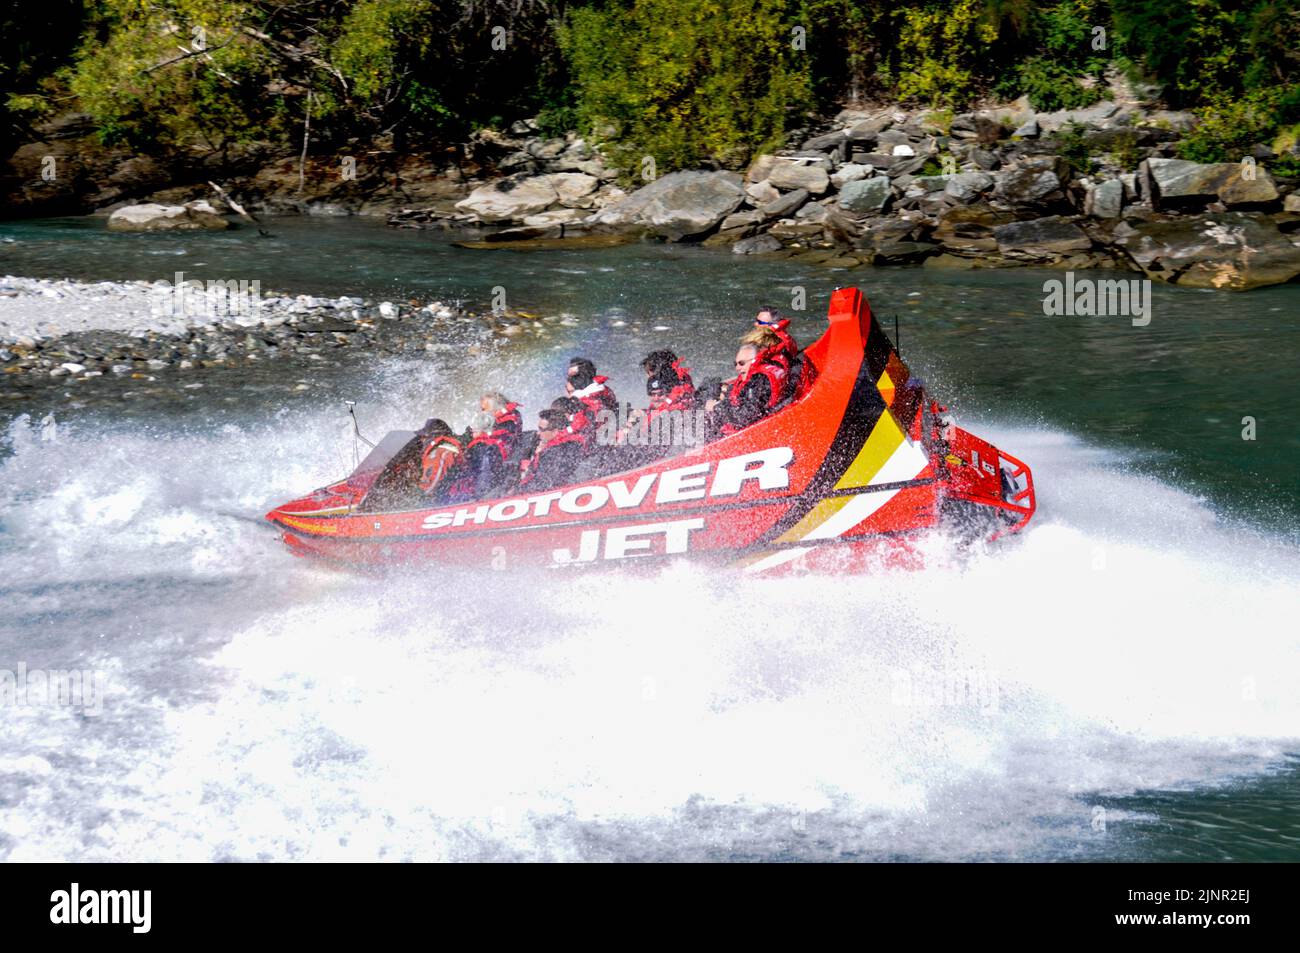 Visitors enjoy the high-speed thrills on a Shotover jet flat bottom boat powered by twin 350 Mercruiser V8 engines, producing a combined 700 horse Stock Photo